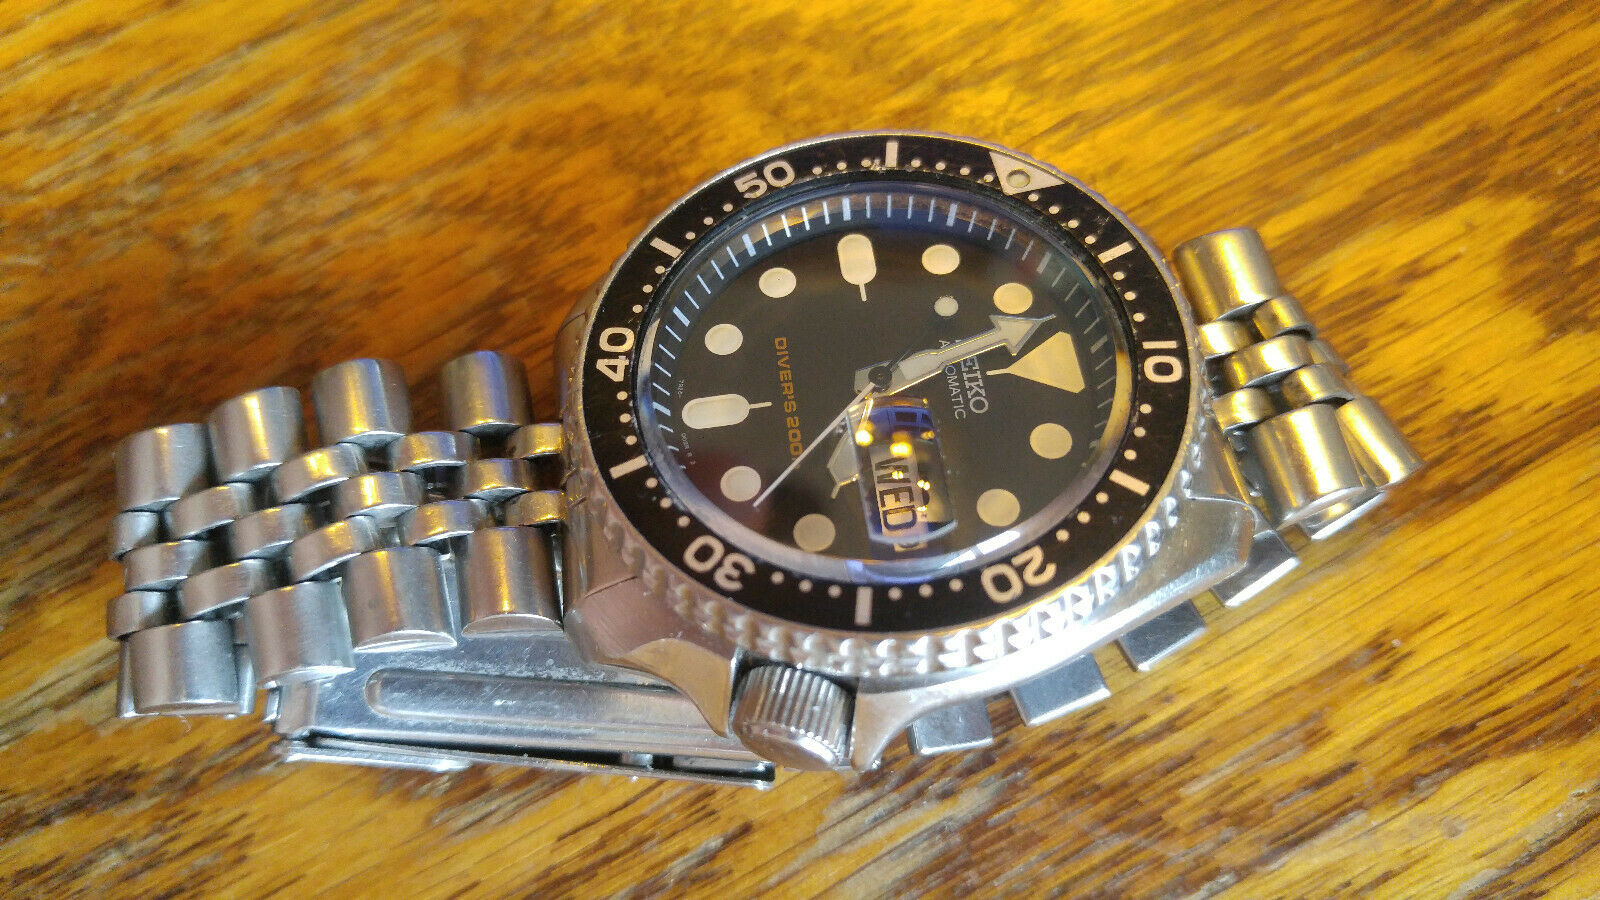 Seiko SKX007 with Sapphire Crystal with Day/date cyclops | WatchCharts